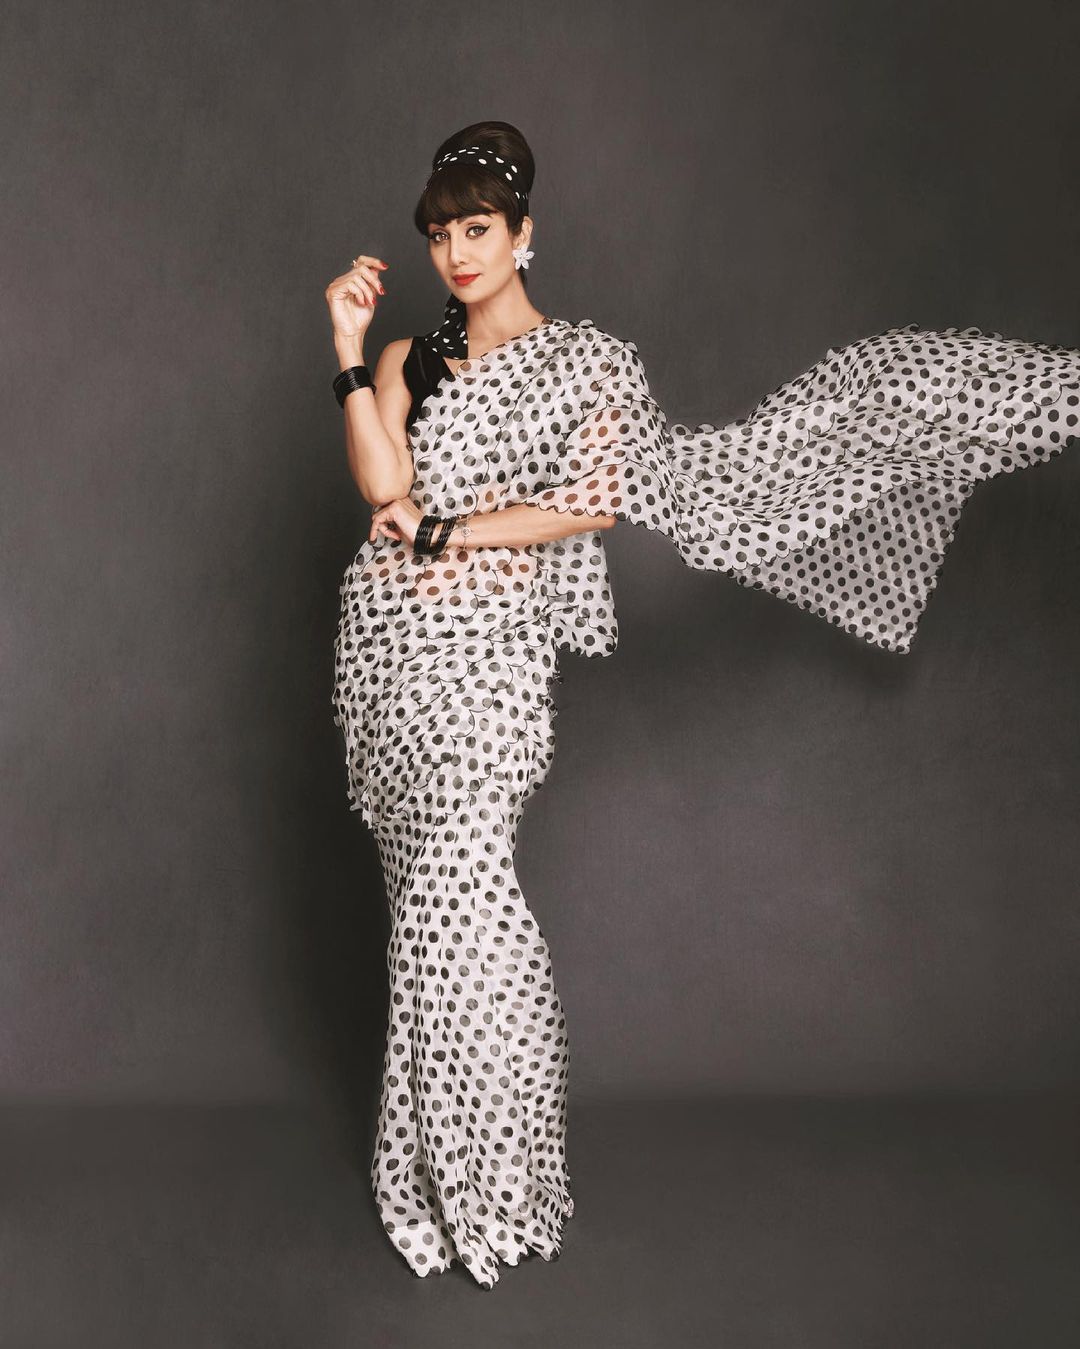 Shilpa Shetty pays an ode to the yesteryears in the polka dotted saree.